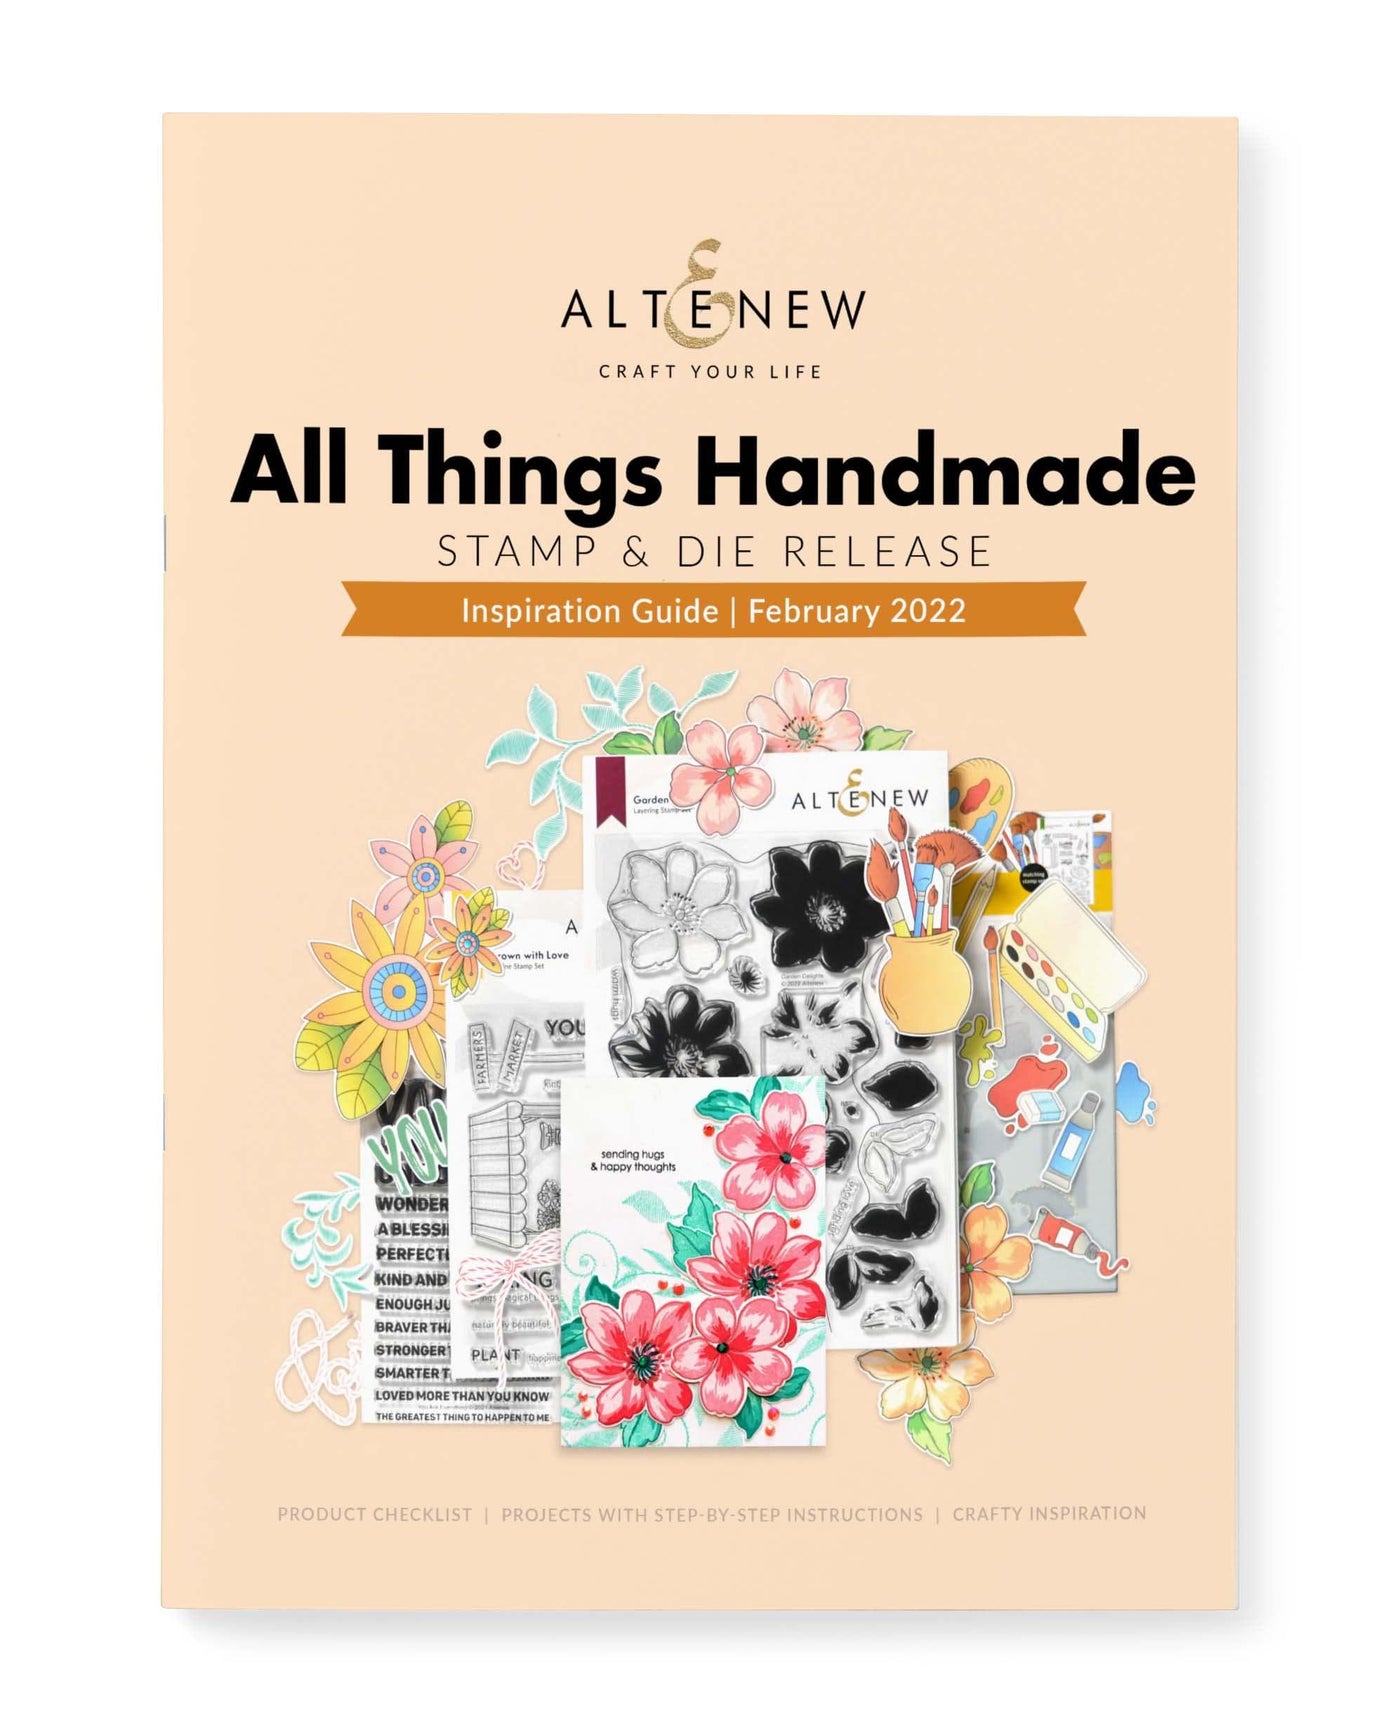 Altenew Digital Downloads All Things Handmade Stamp & Die Release Inspiration Guide (Ebook)